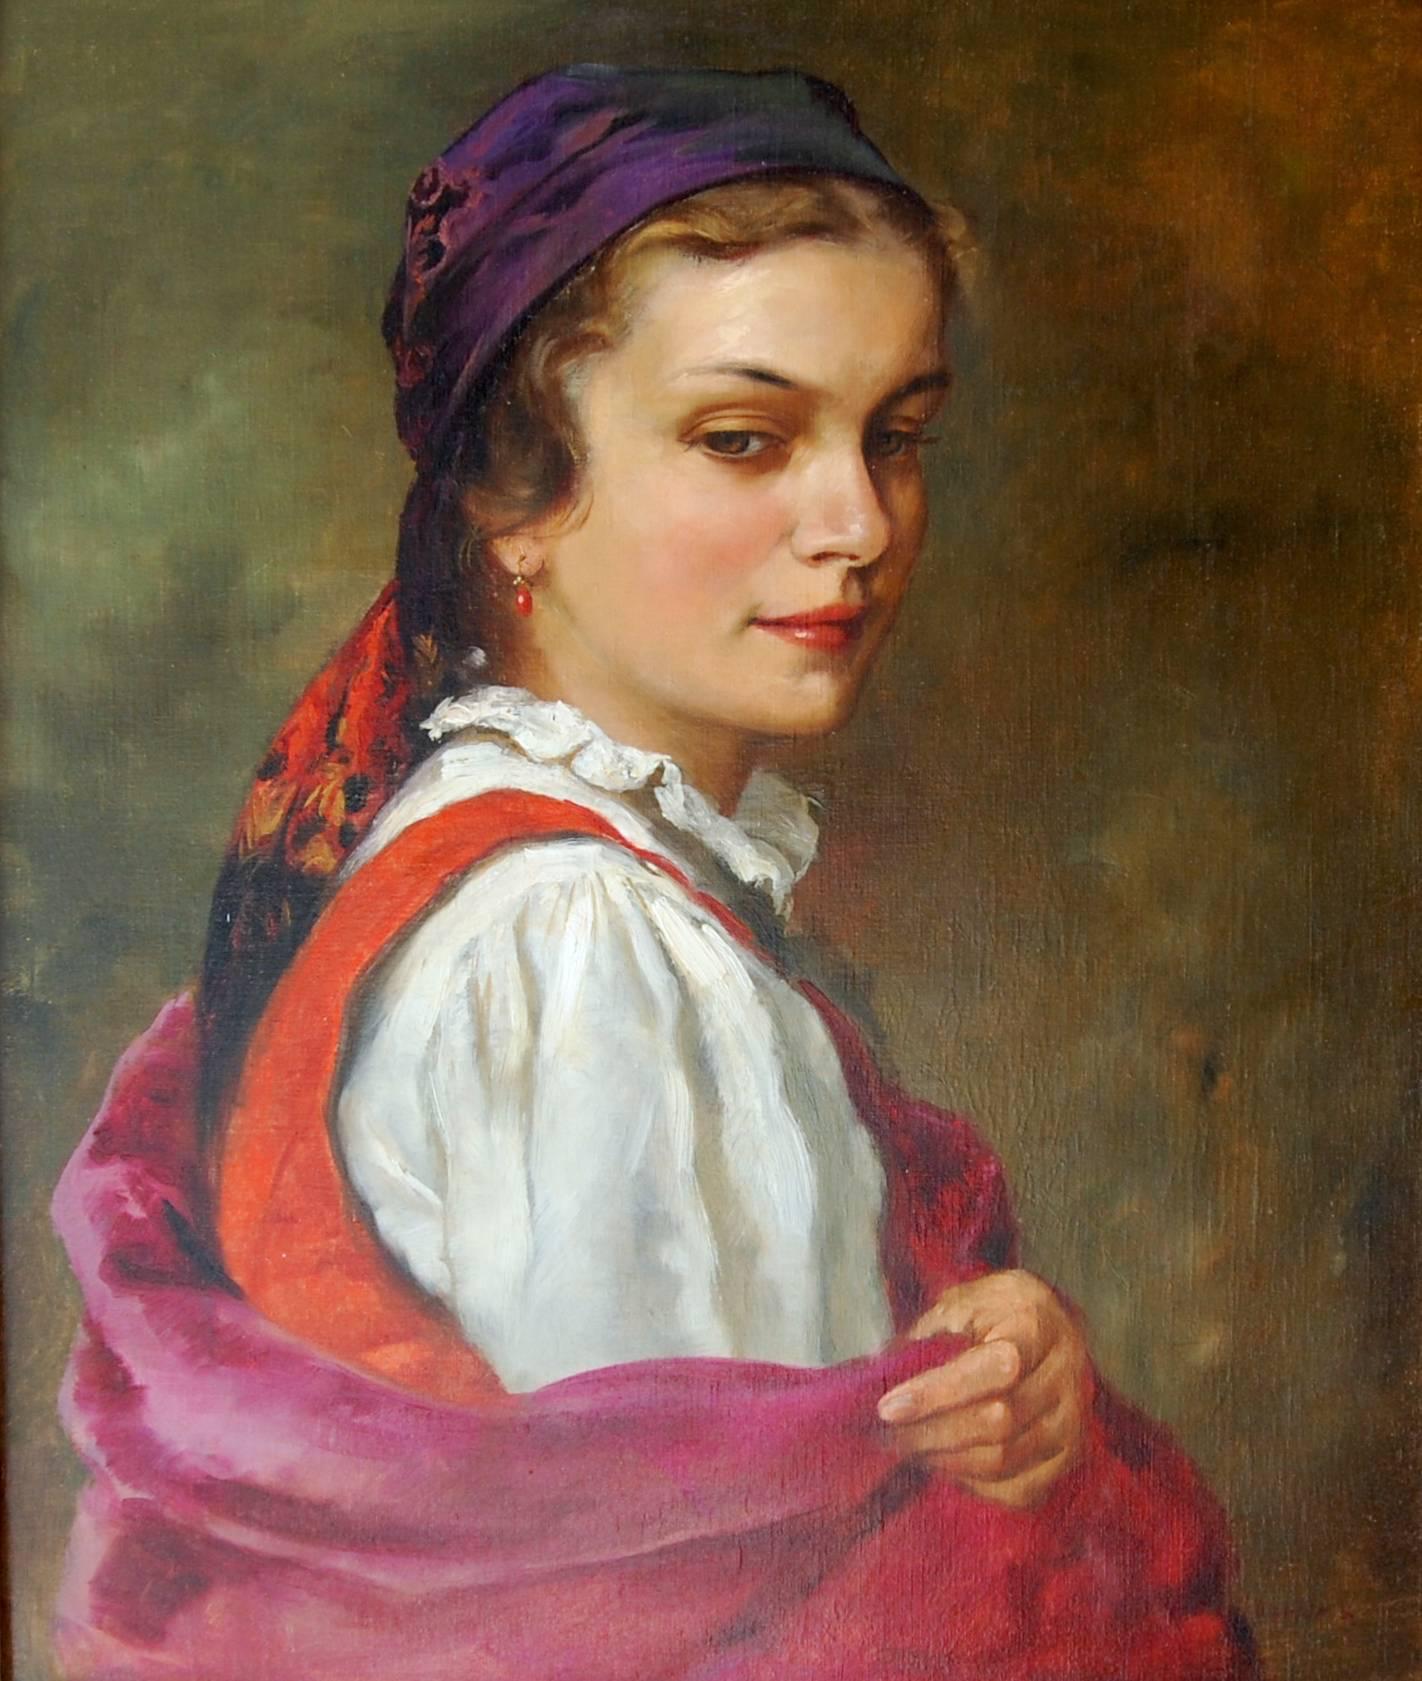  Woman With A Red Scarf  - Painting by Lajos Rezes Molnar